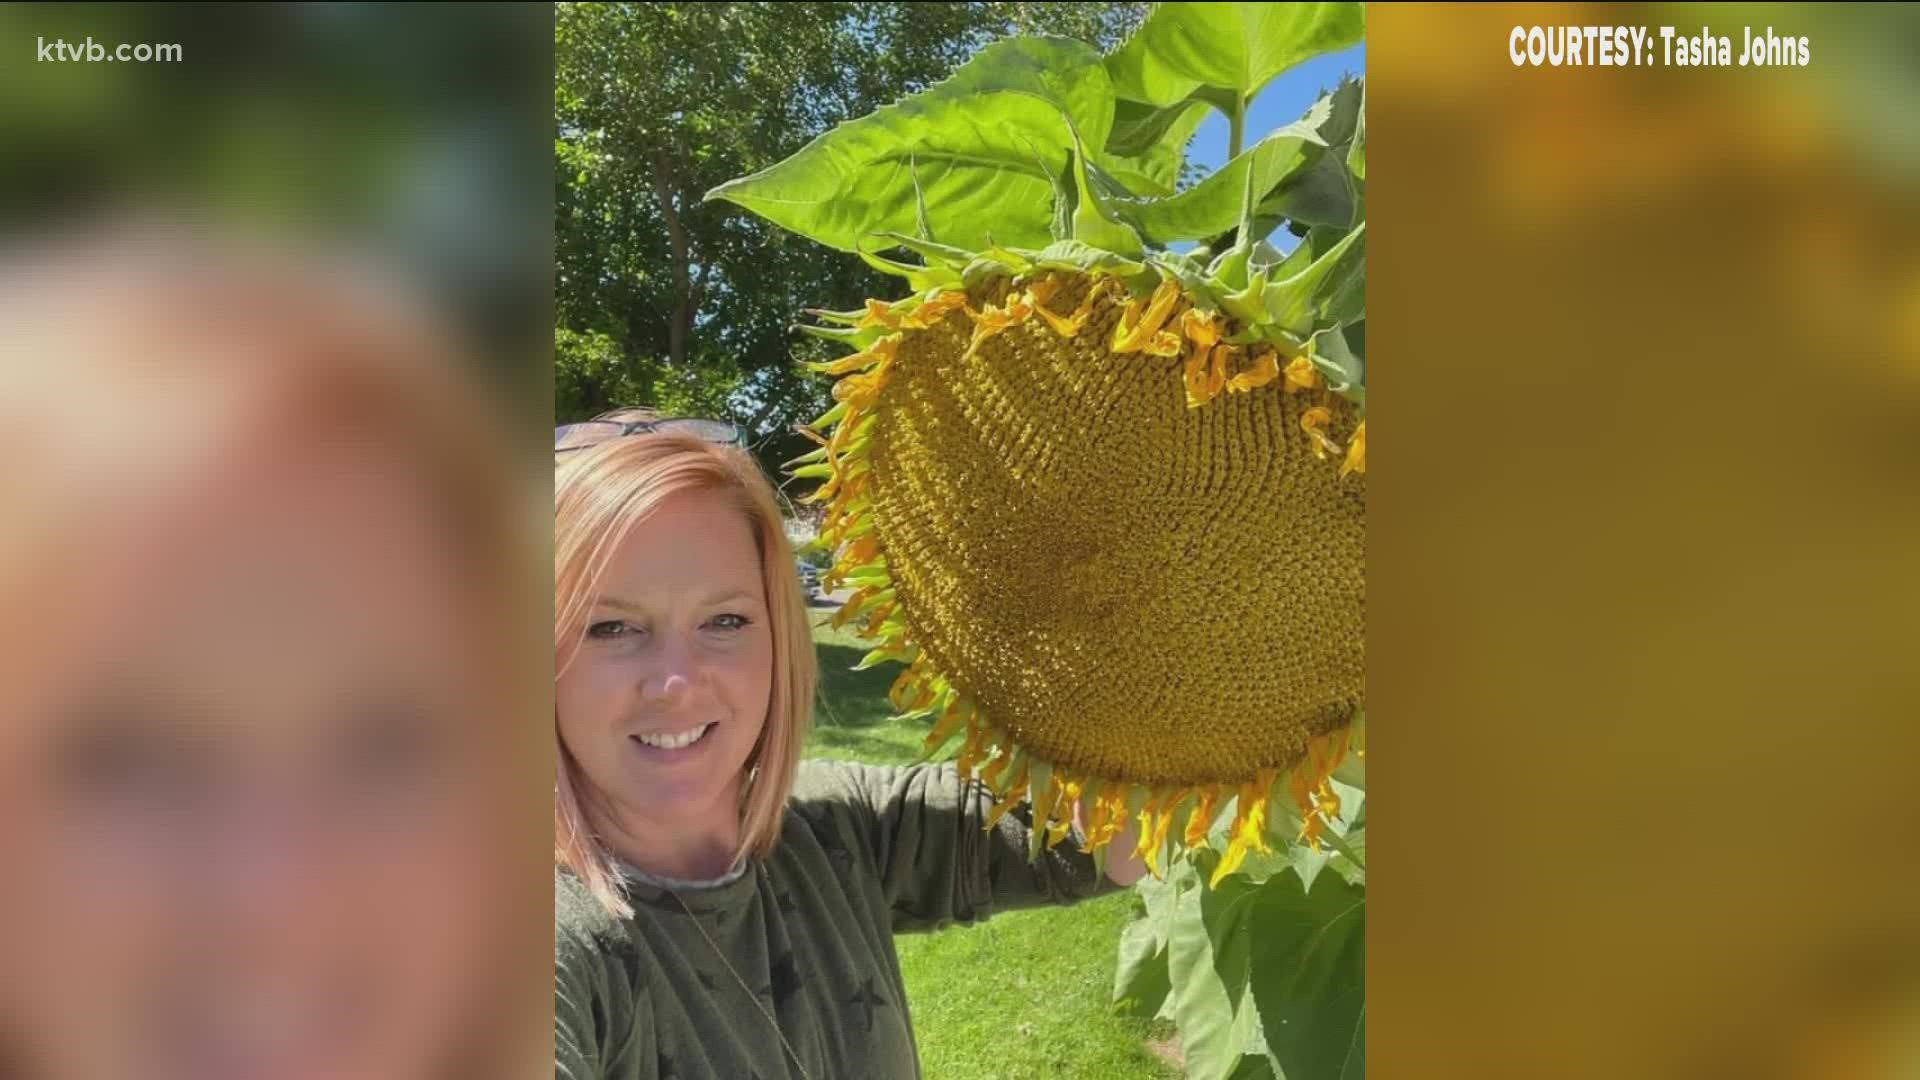 Heat, drought and the pandemic made 2021 a tough year, but many Idahoans had some garden successes to celebrate and share.